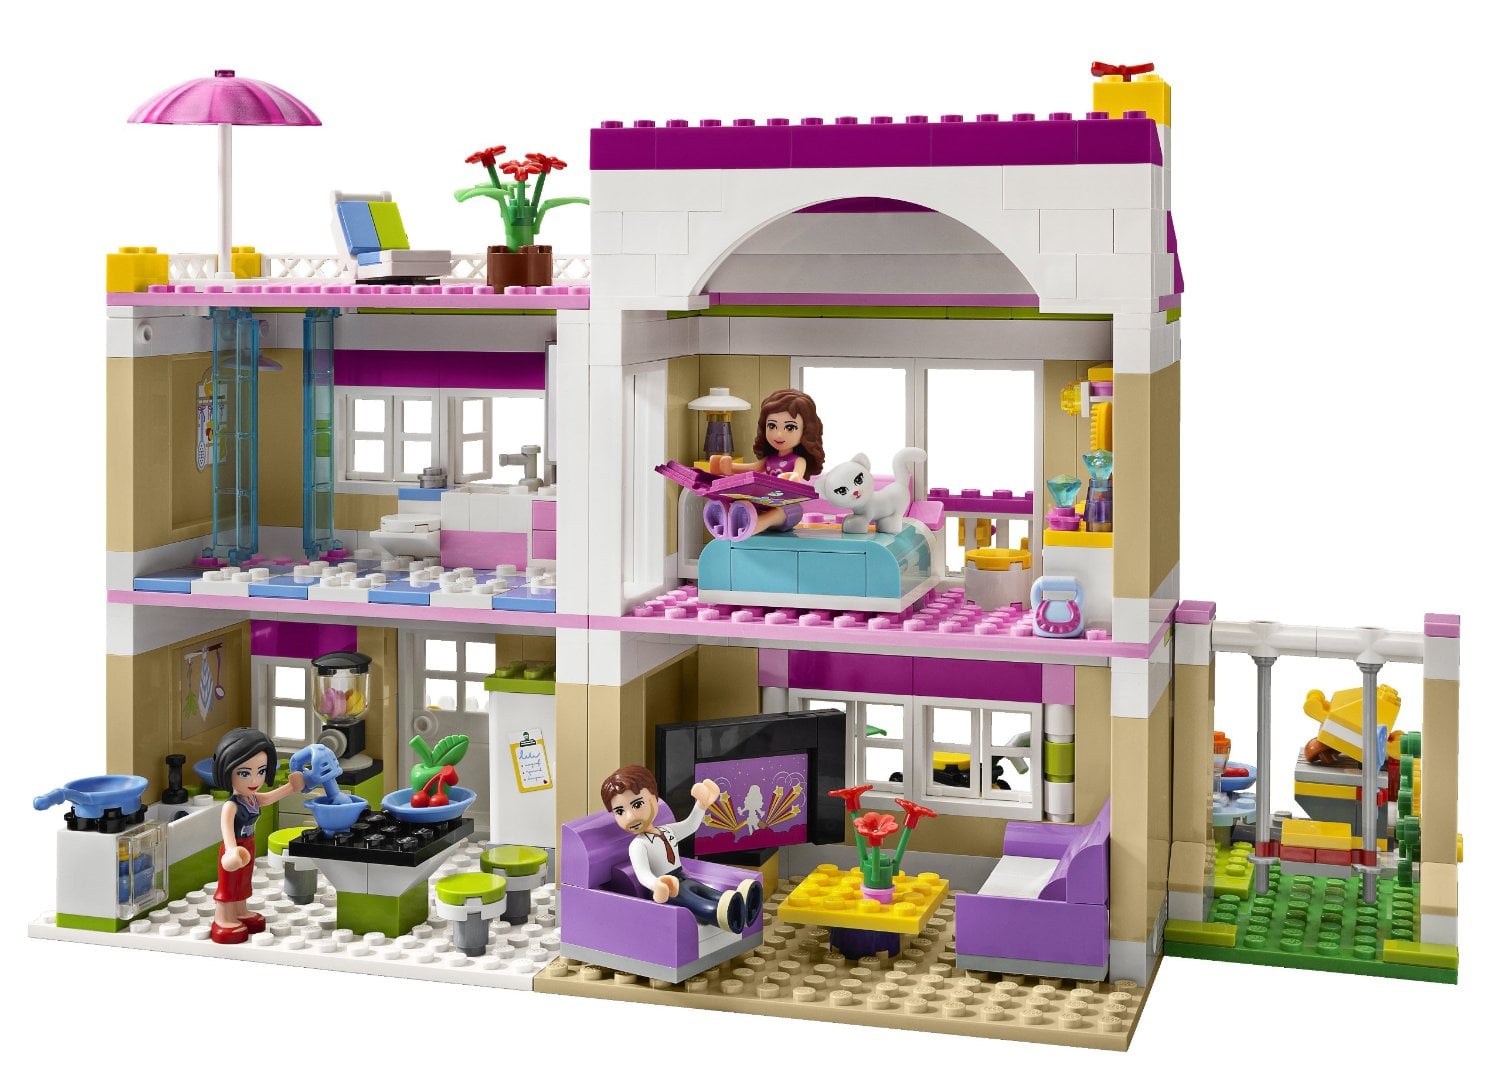 For 5-Year-Olds: Lego Friends Olivia's 